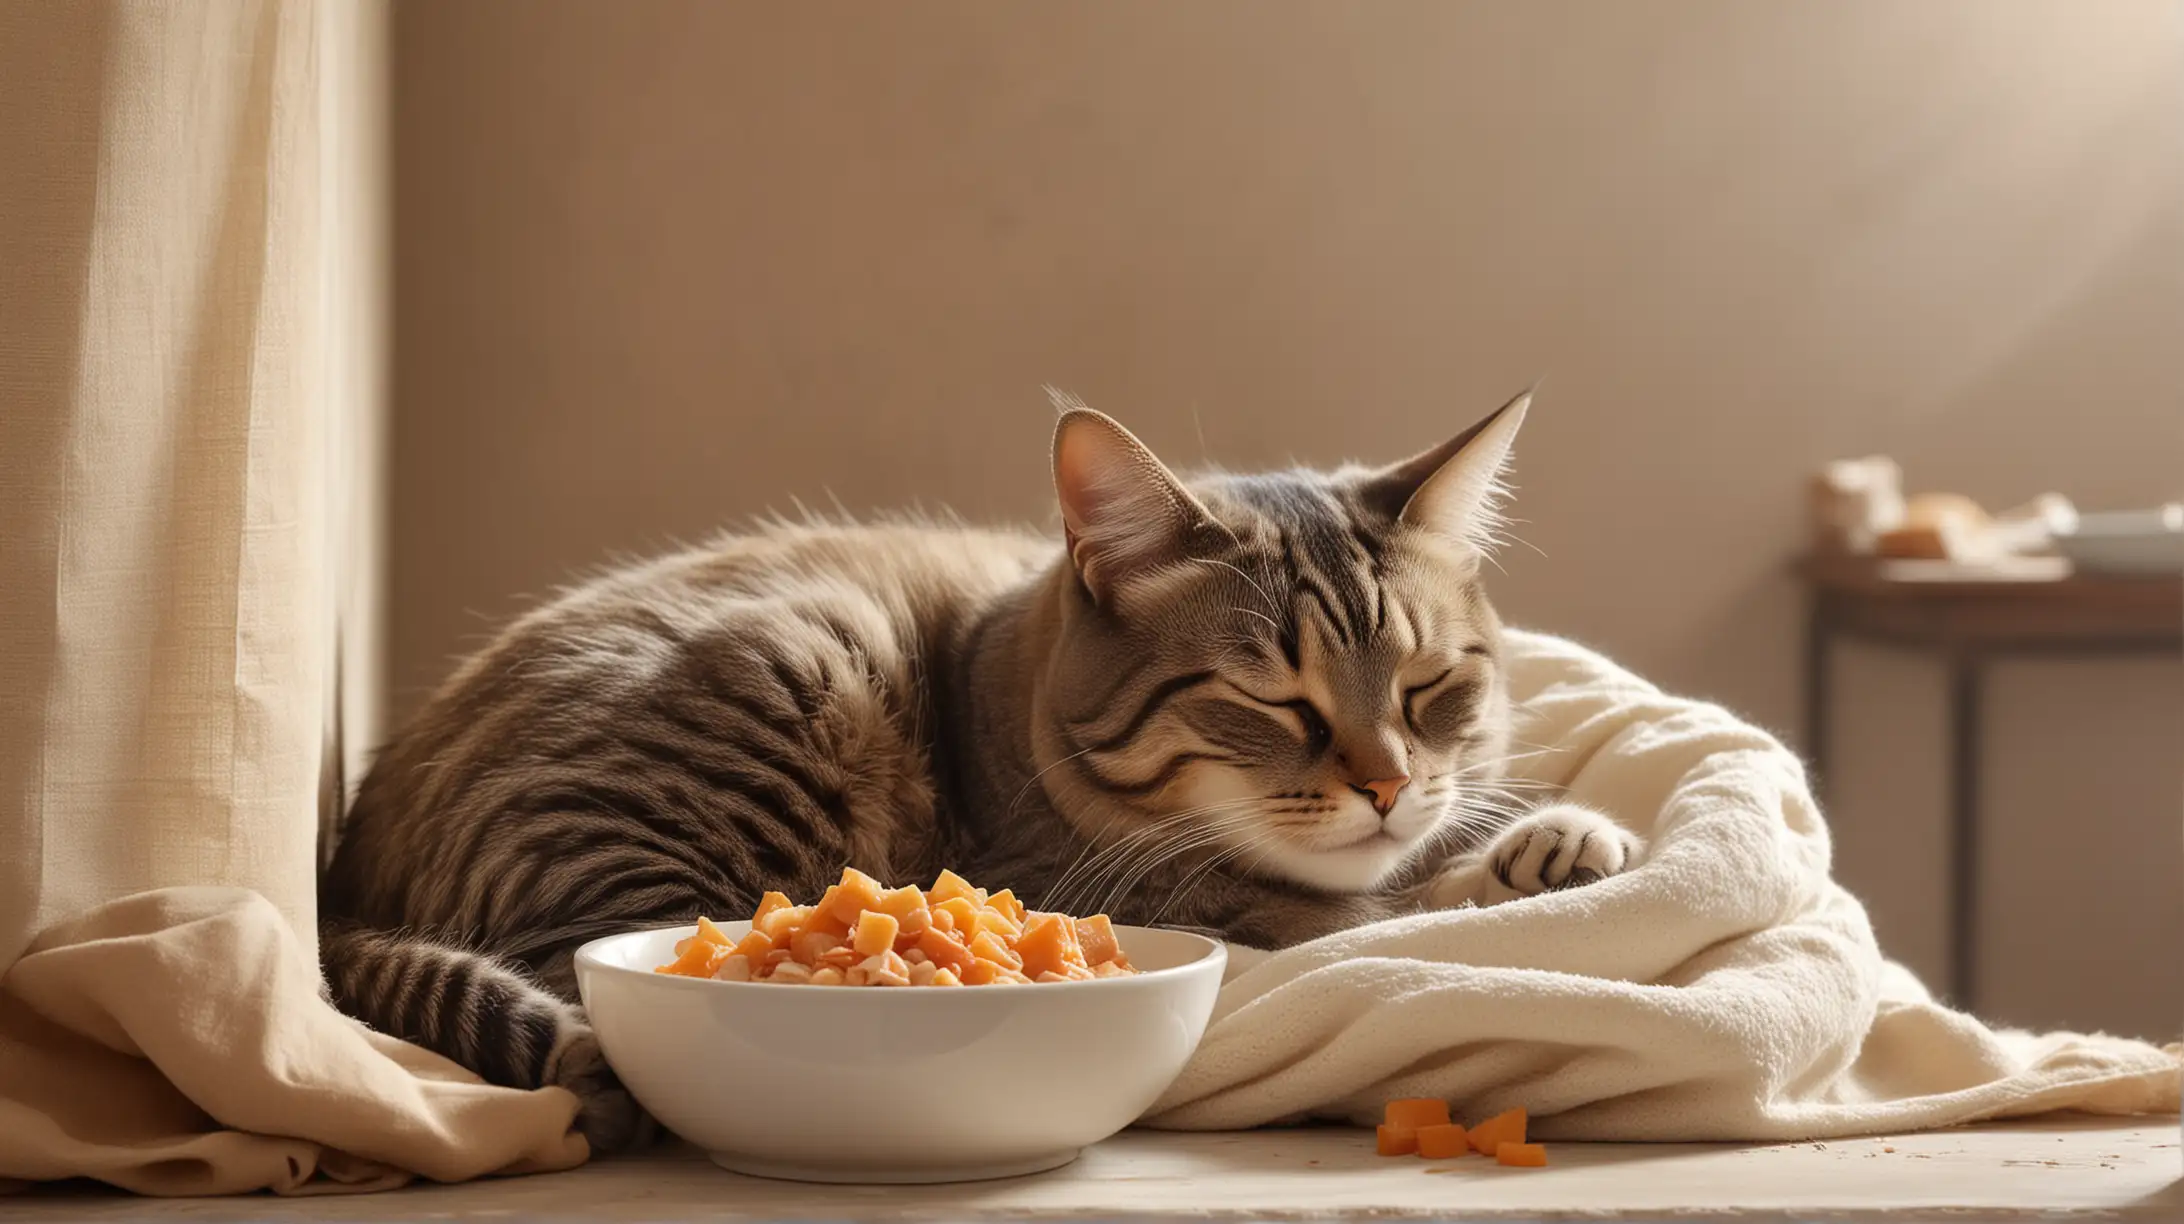 A real photo of a relaxed cat in complete harmony, lazily sleeping in a place of his choice. Next to it, a bowl of food, symbolizing access to life's free pleasures. In the background, a delicate haze of love that the cat gains effortlessly, adding light humor to the scene.